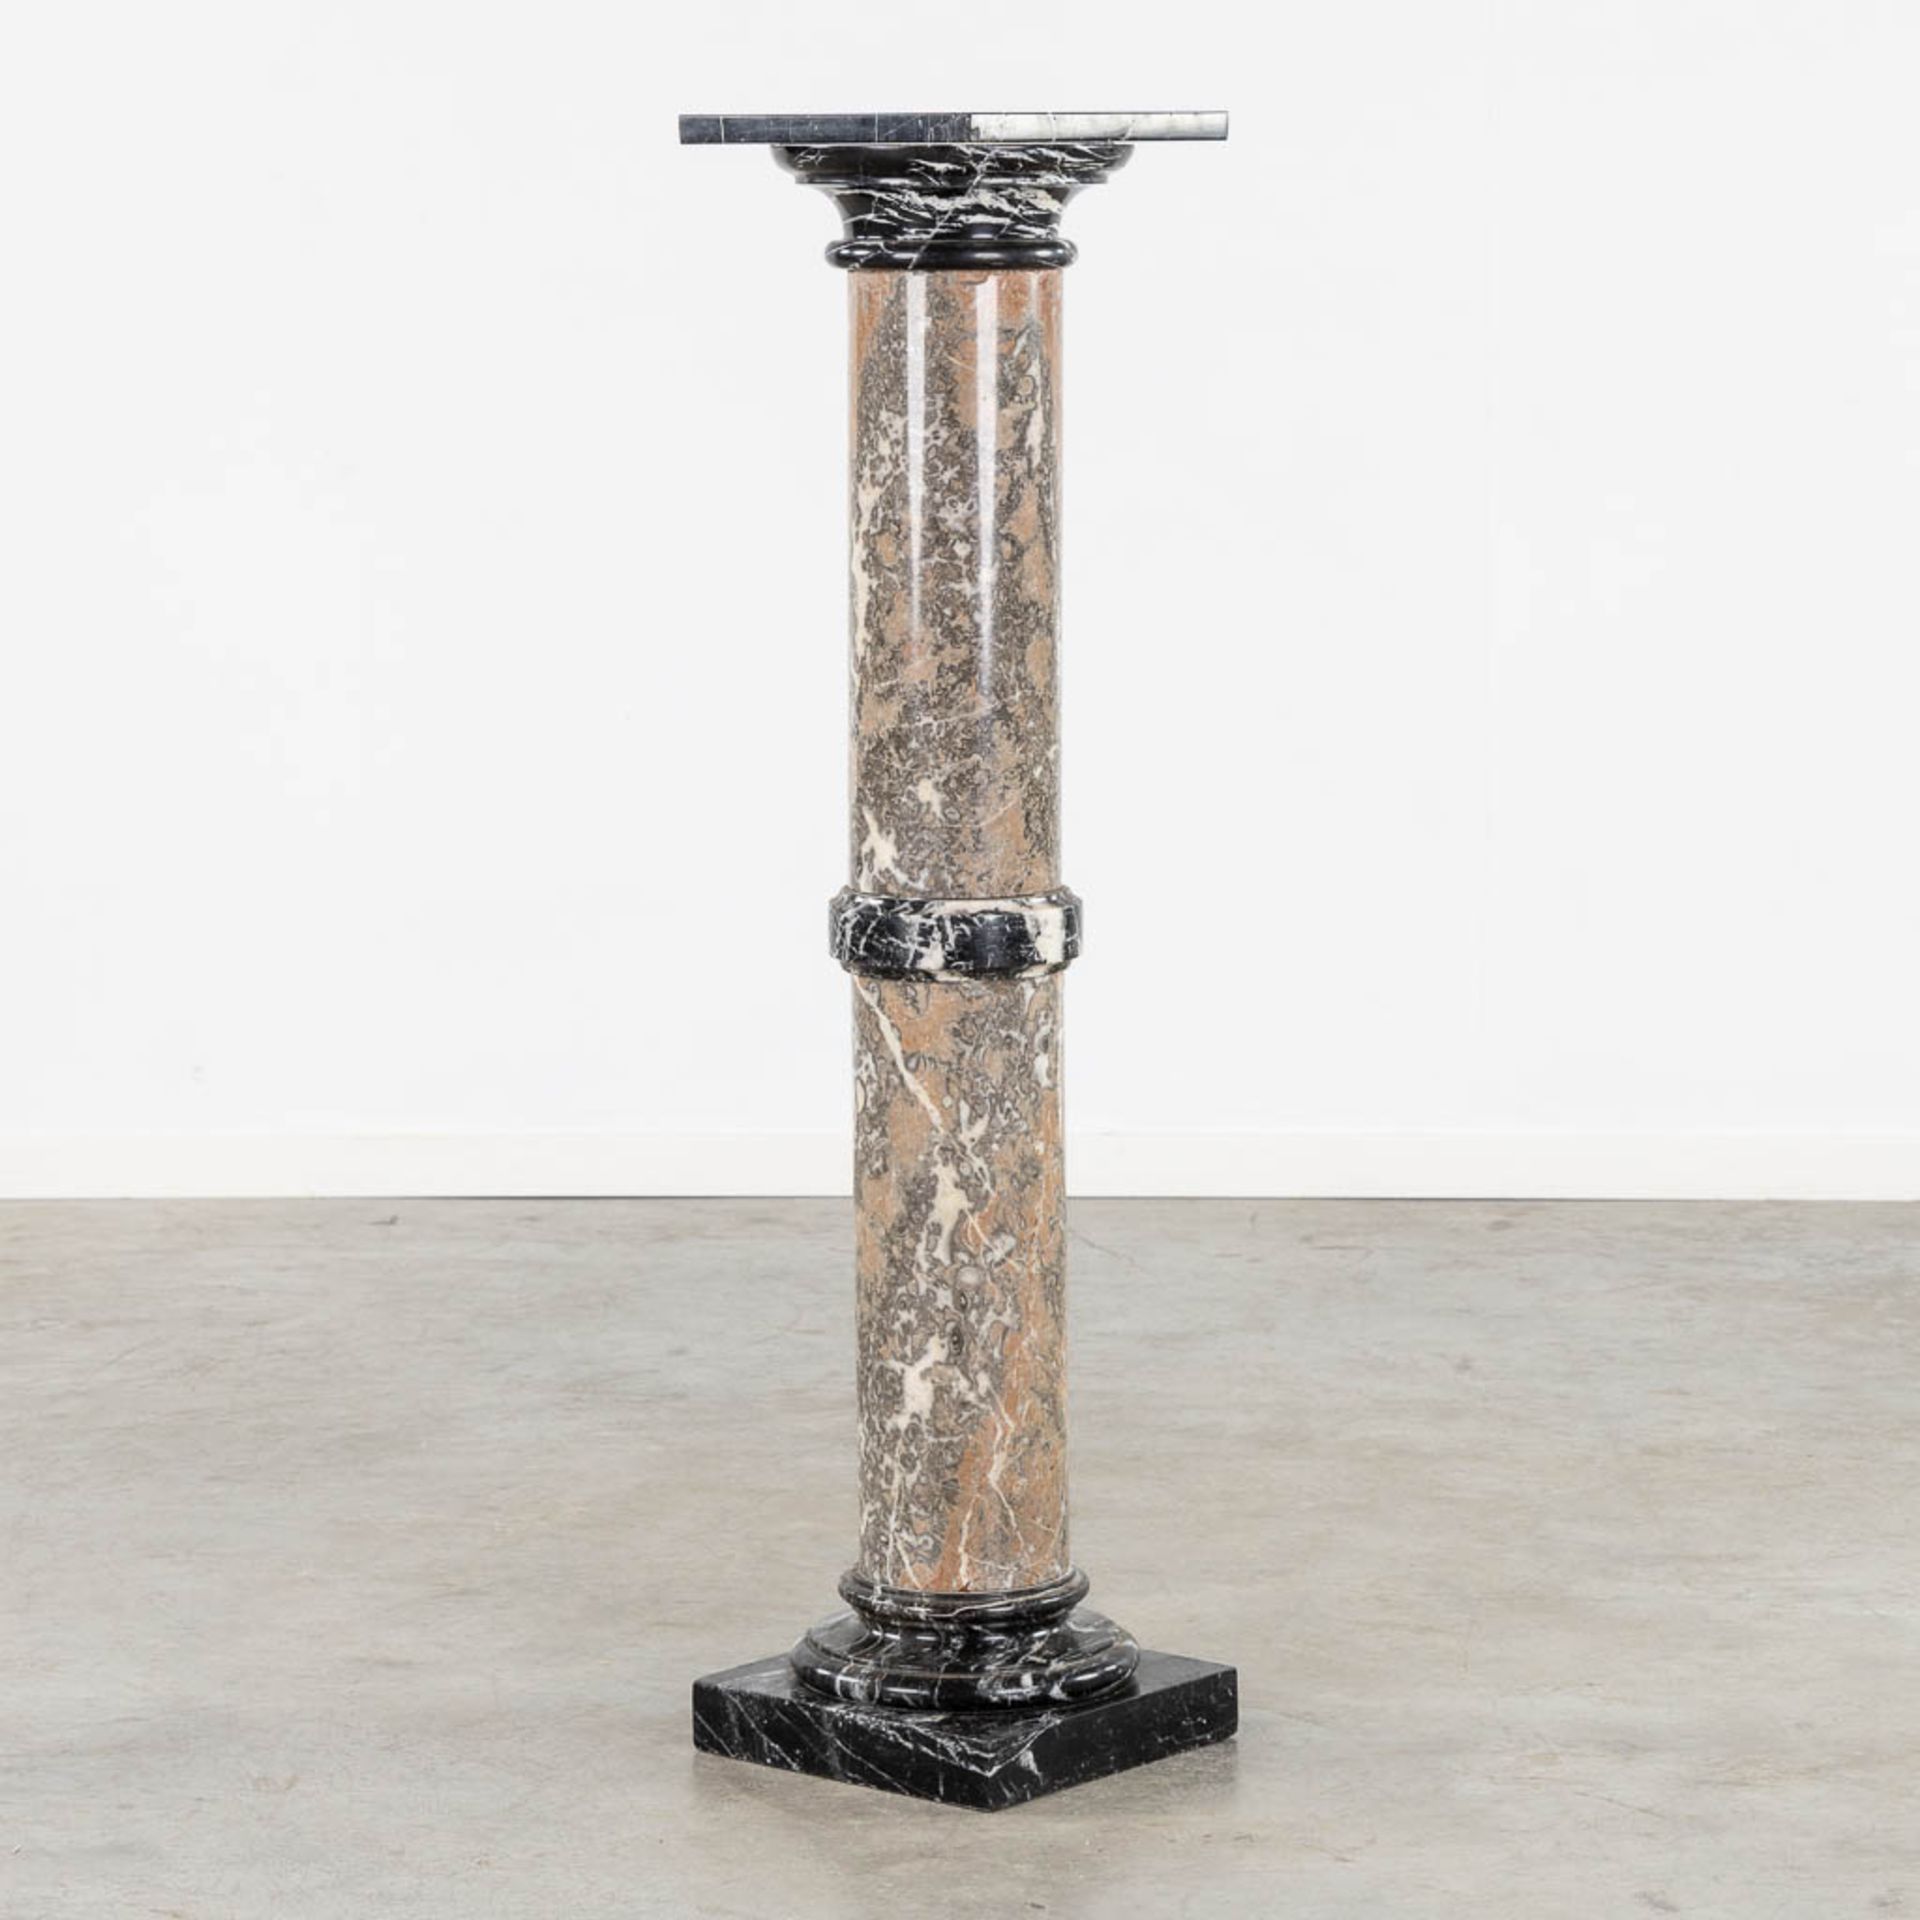 An antique pedestal, black, grey and brown marble. Circa 1900. (L:27 x W:27 x H:115 cm) - Image 3 of 9